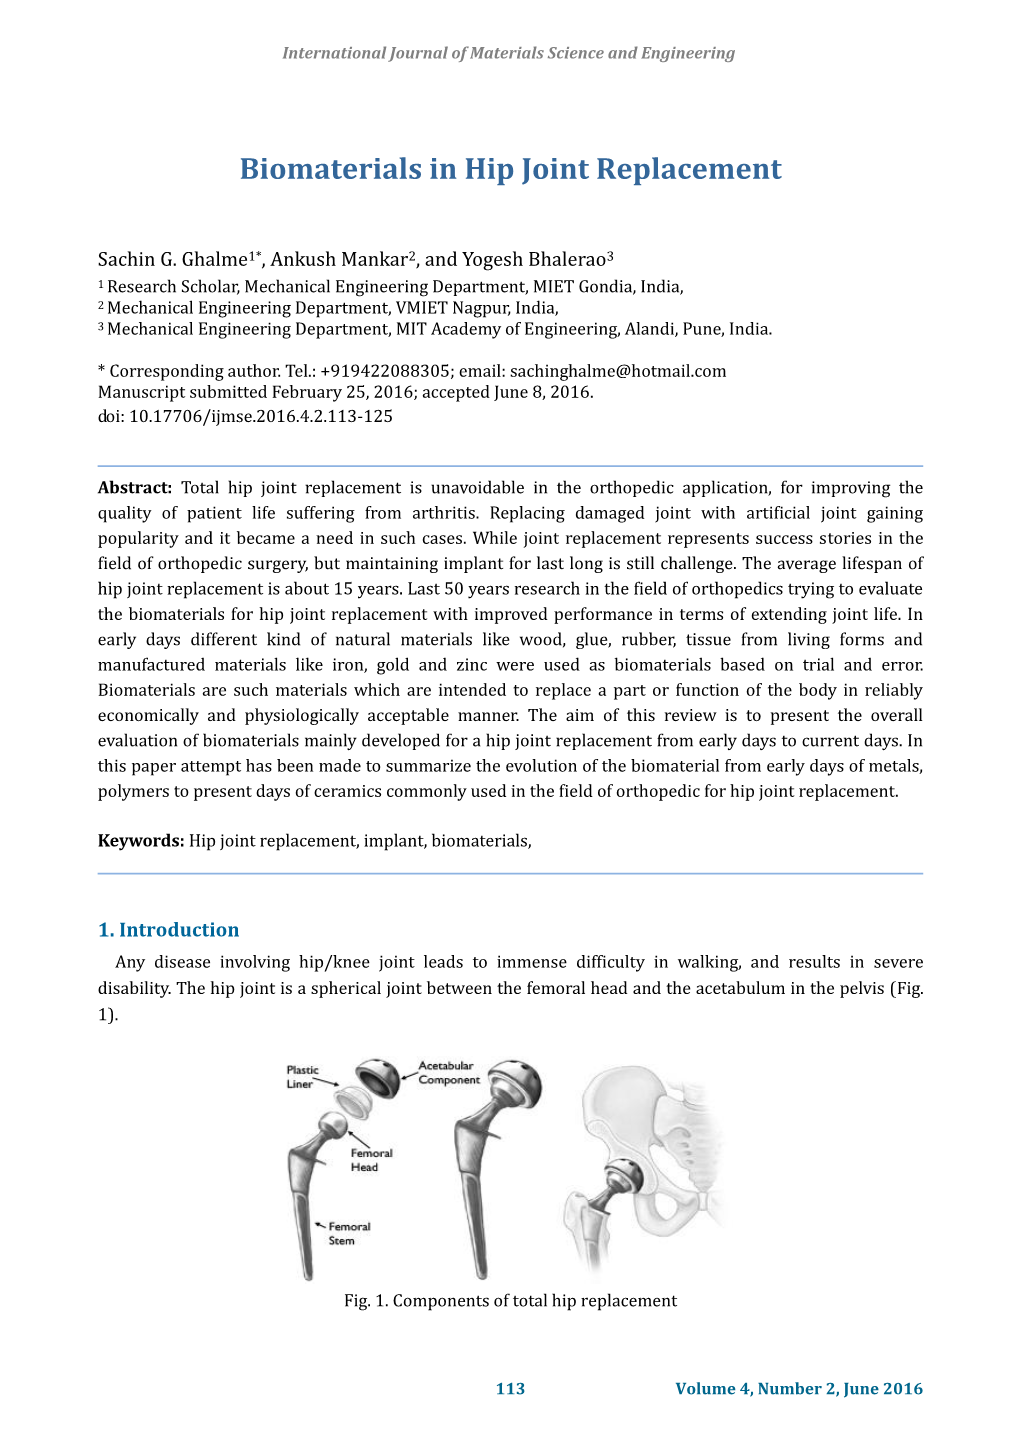 Biomaterials in Hip Joint Replacement